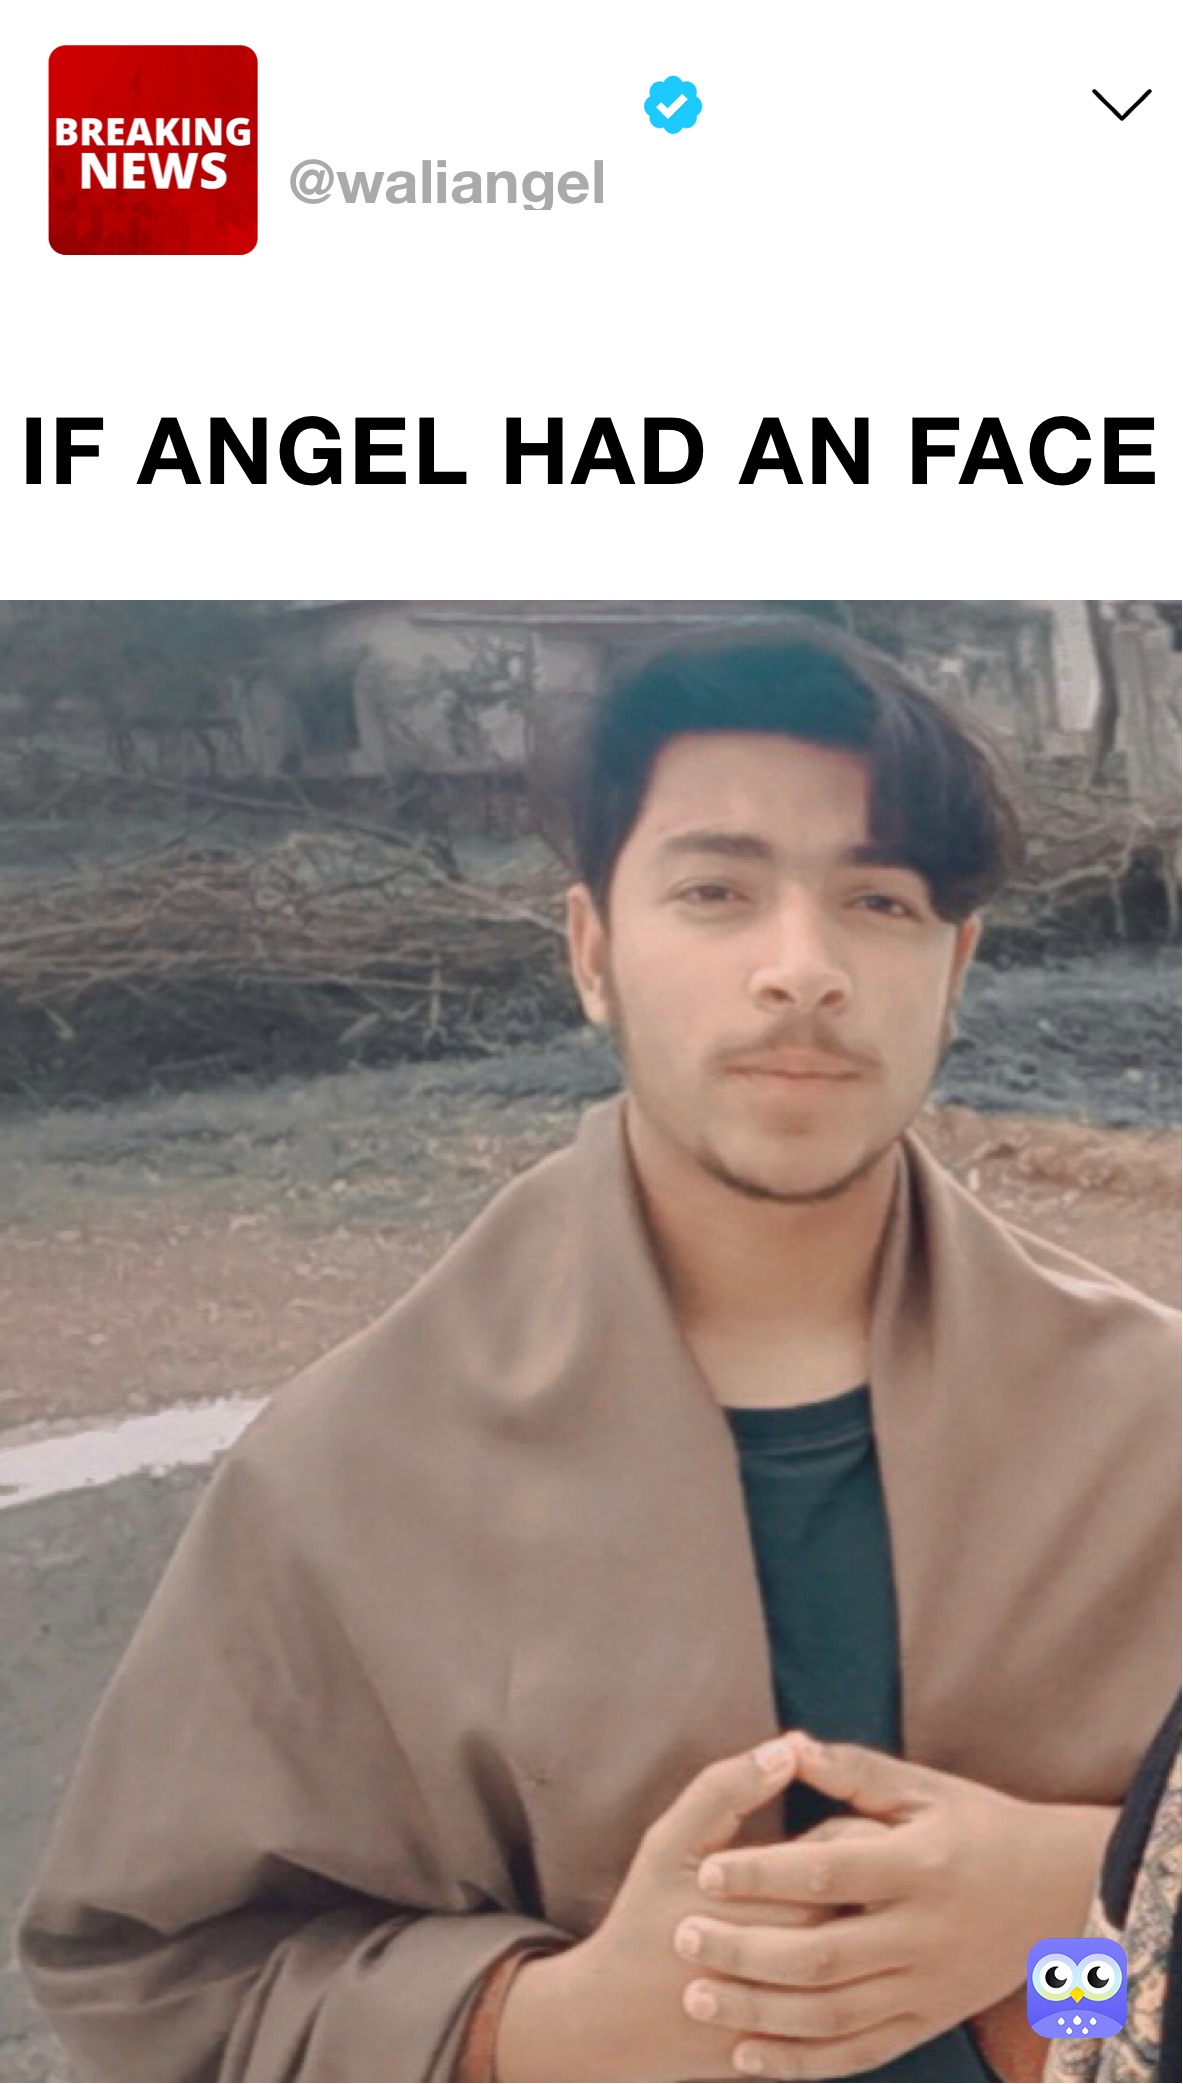 IF ANGEL HAD AN FACE